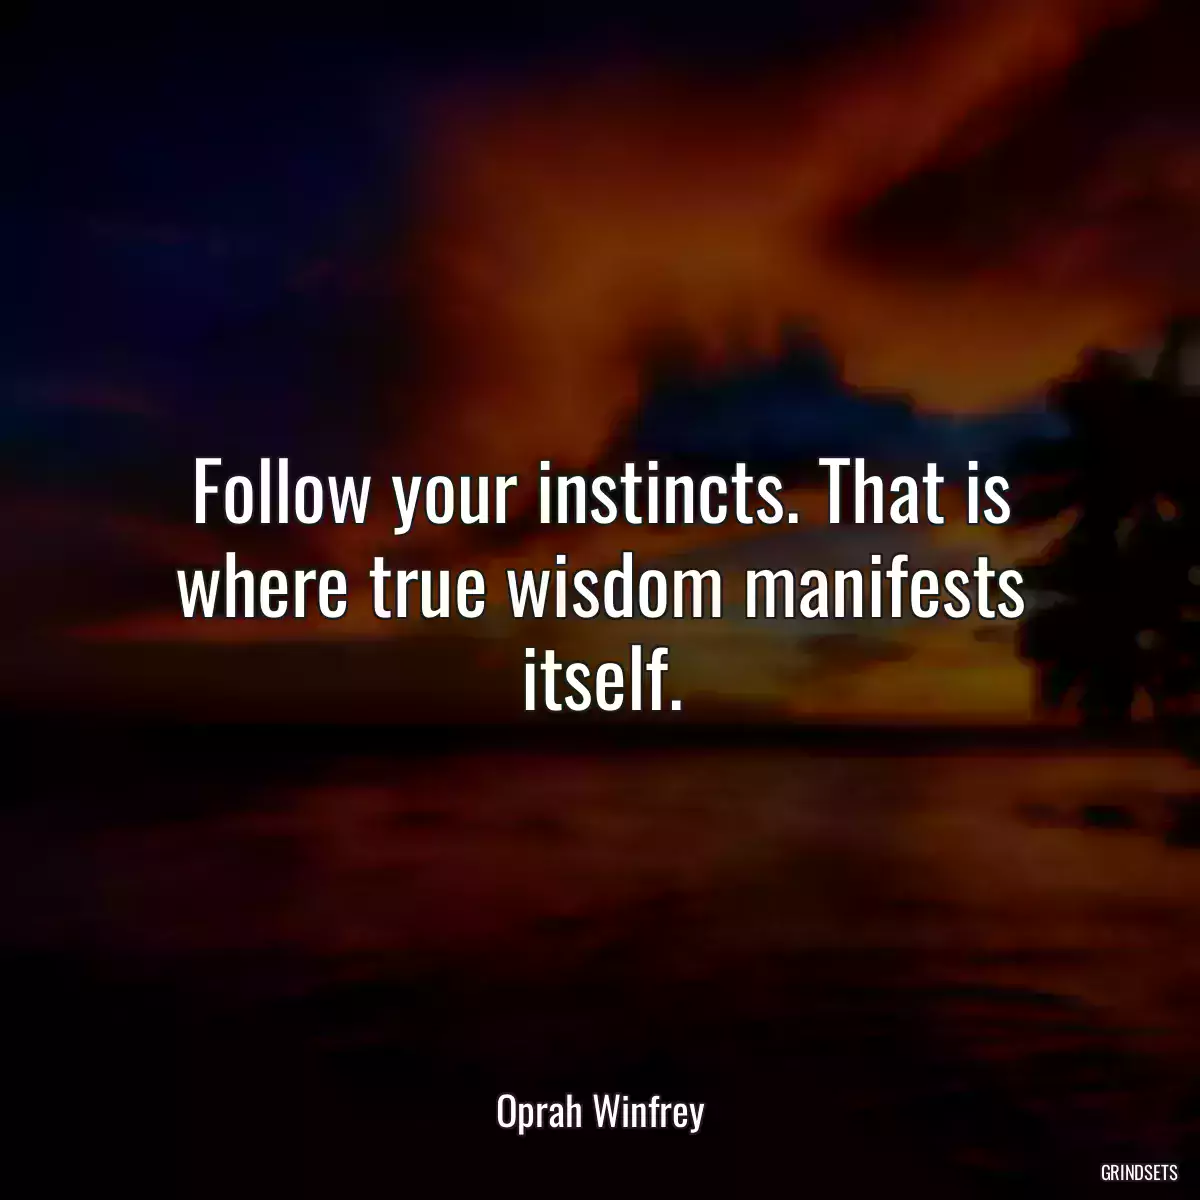 Follow your instincts. That is where true wisdom manifests itself.